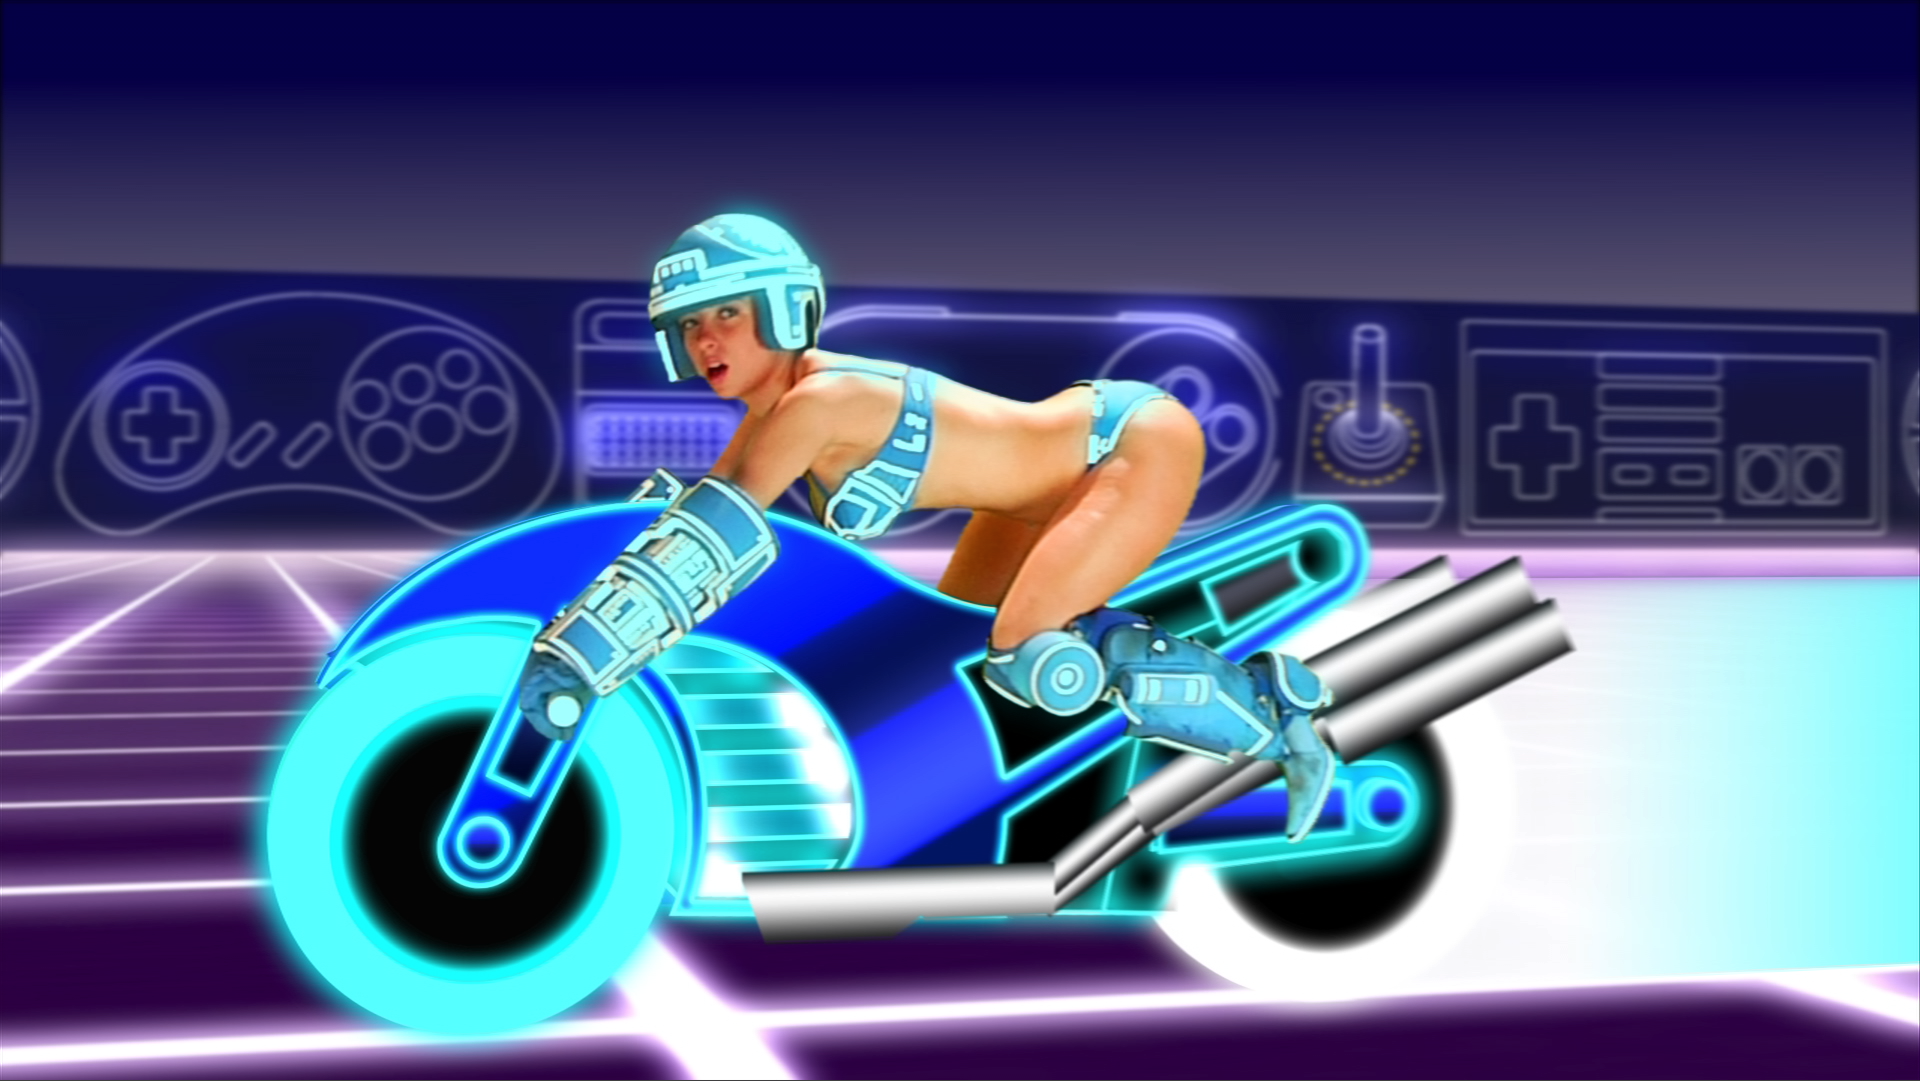 Tron Girl on Light Cycle by devianttomsmall on DeviantArt